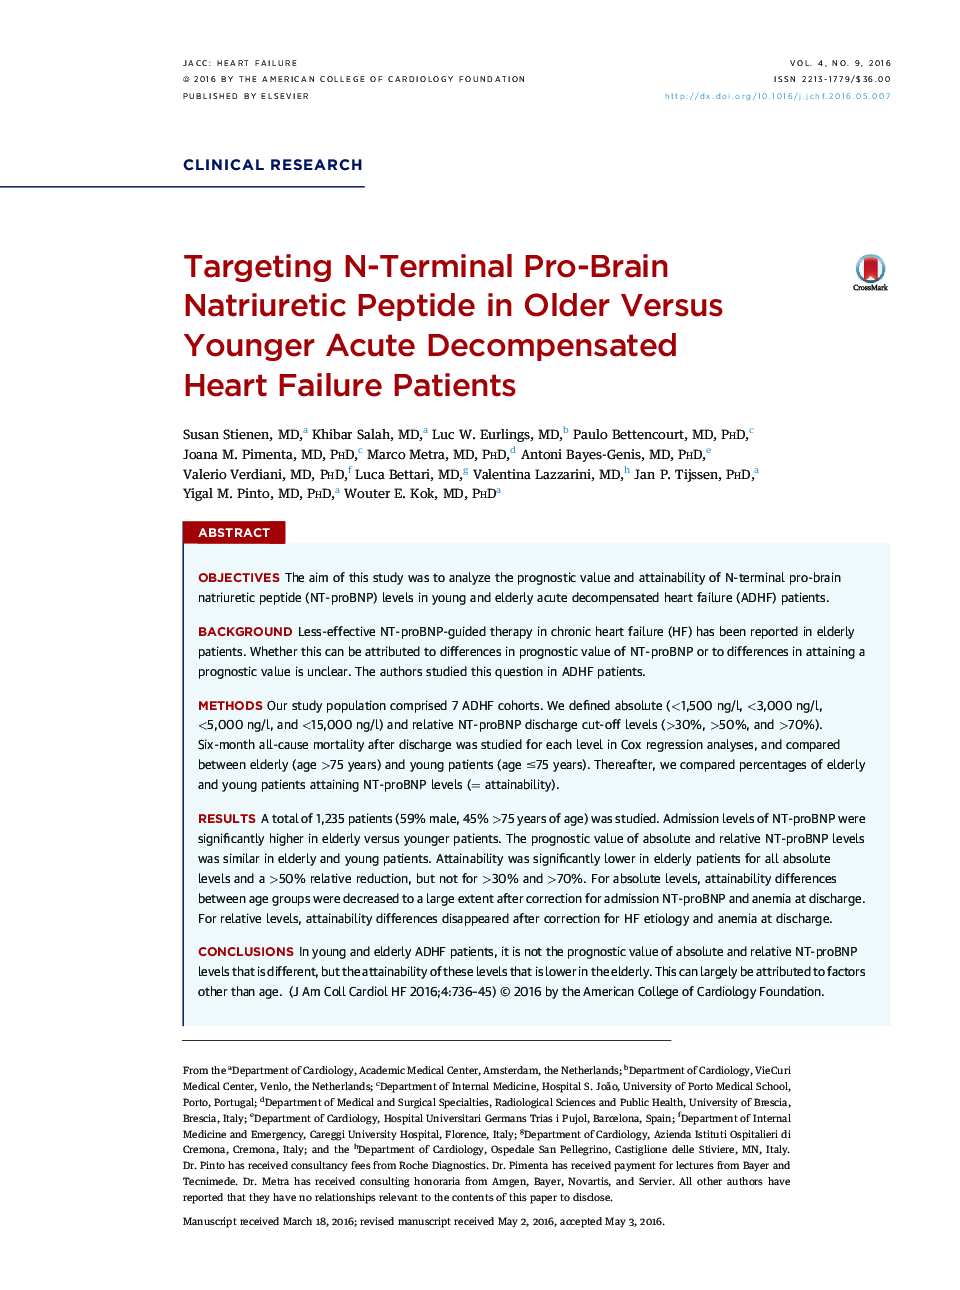 Targeting N-Terminal Pro-Brain Natriuretic Peptide in Older Versus Younger Acute Decompensated Heart Failure Patients 